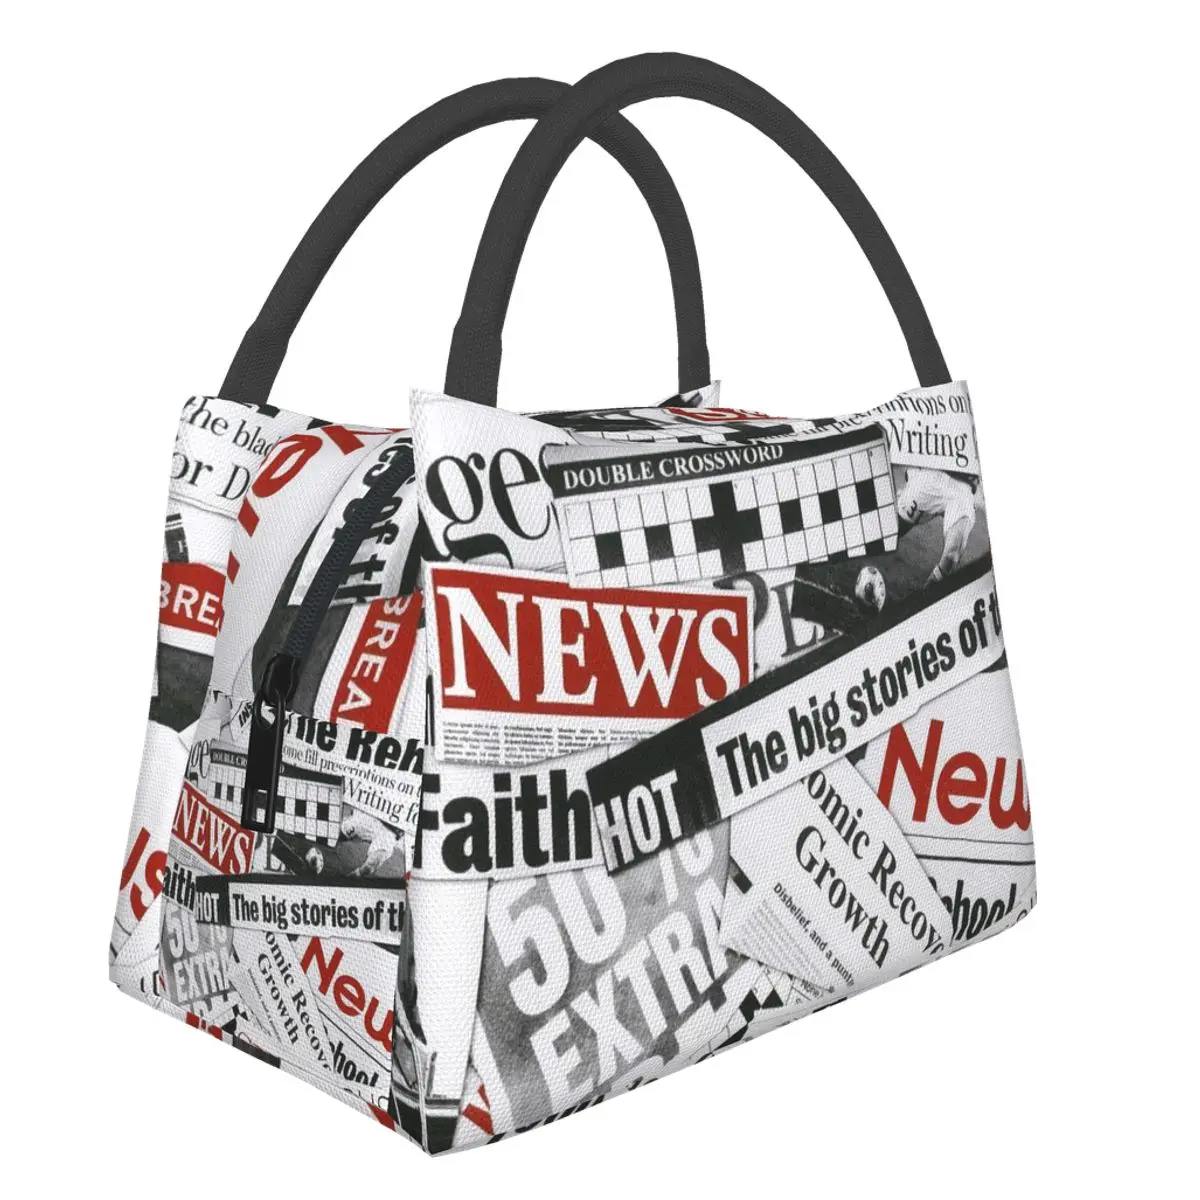 Portable Lunch Bag Newspaper Pattern Print Thermal Insulated Lunch Box Tote Cooler Handbag Bento Dinner Container School Storage lunch bag corduroy canvas lunch box drawstring picnic tote eco cotton cloth small handbag dinner container food storage bags